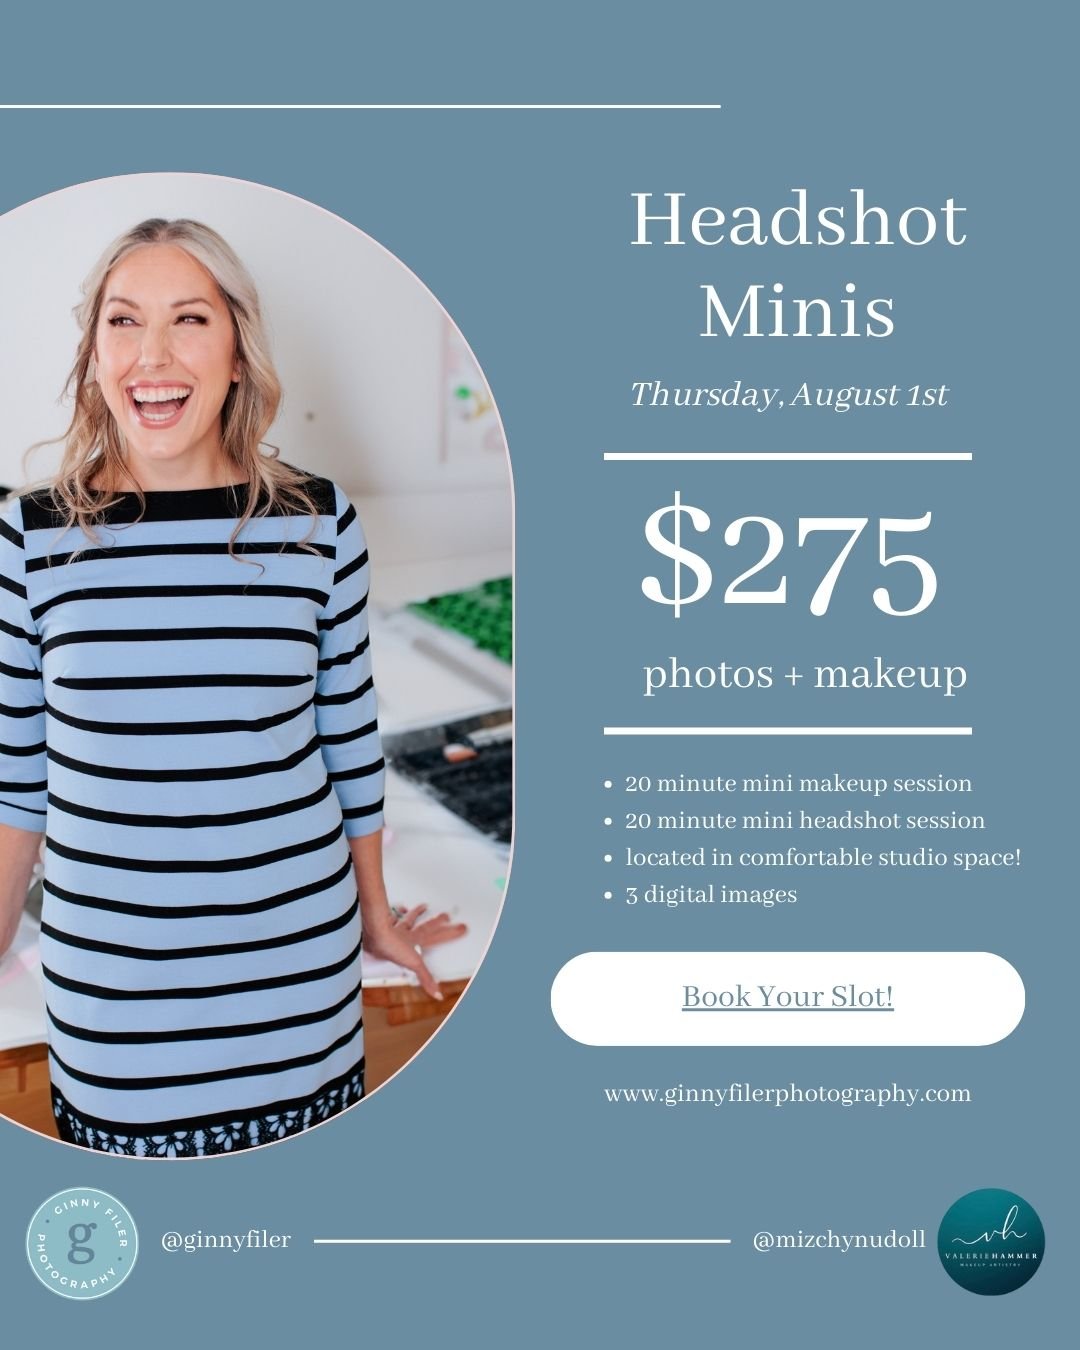 I'm excited to announce studio headshot mini sessions on Thursday, August 1st!  Get a mini makeup session with @mizchynuhdoll and some gorgeous (climate controlled!) headshots! #linkinbio to sign up!

#ginnyfilerphotography #dmvheadshots #miniheadsho